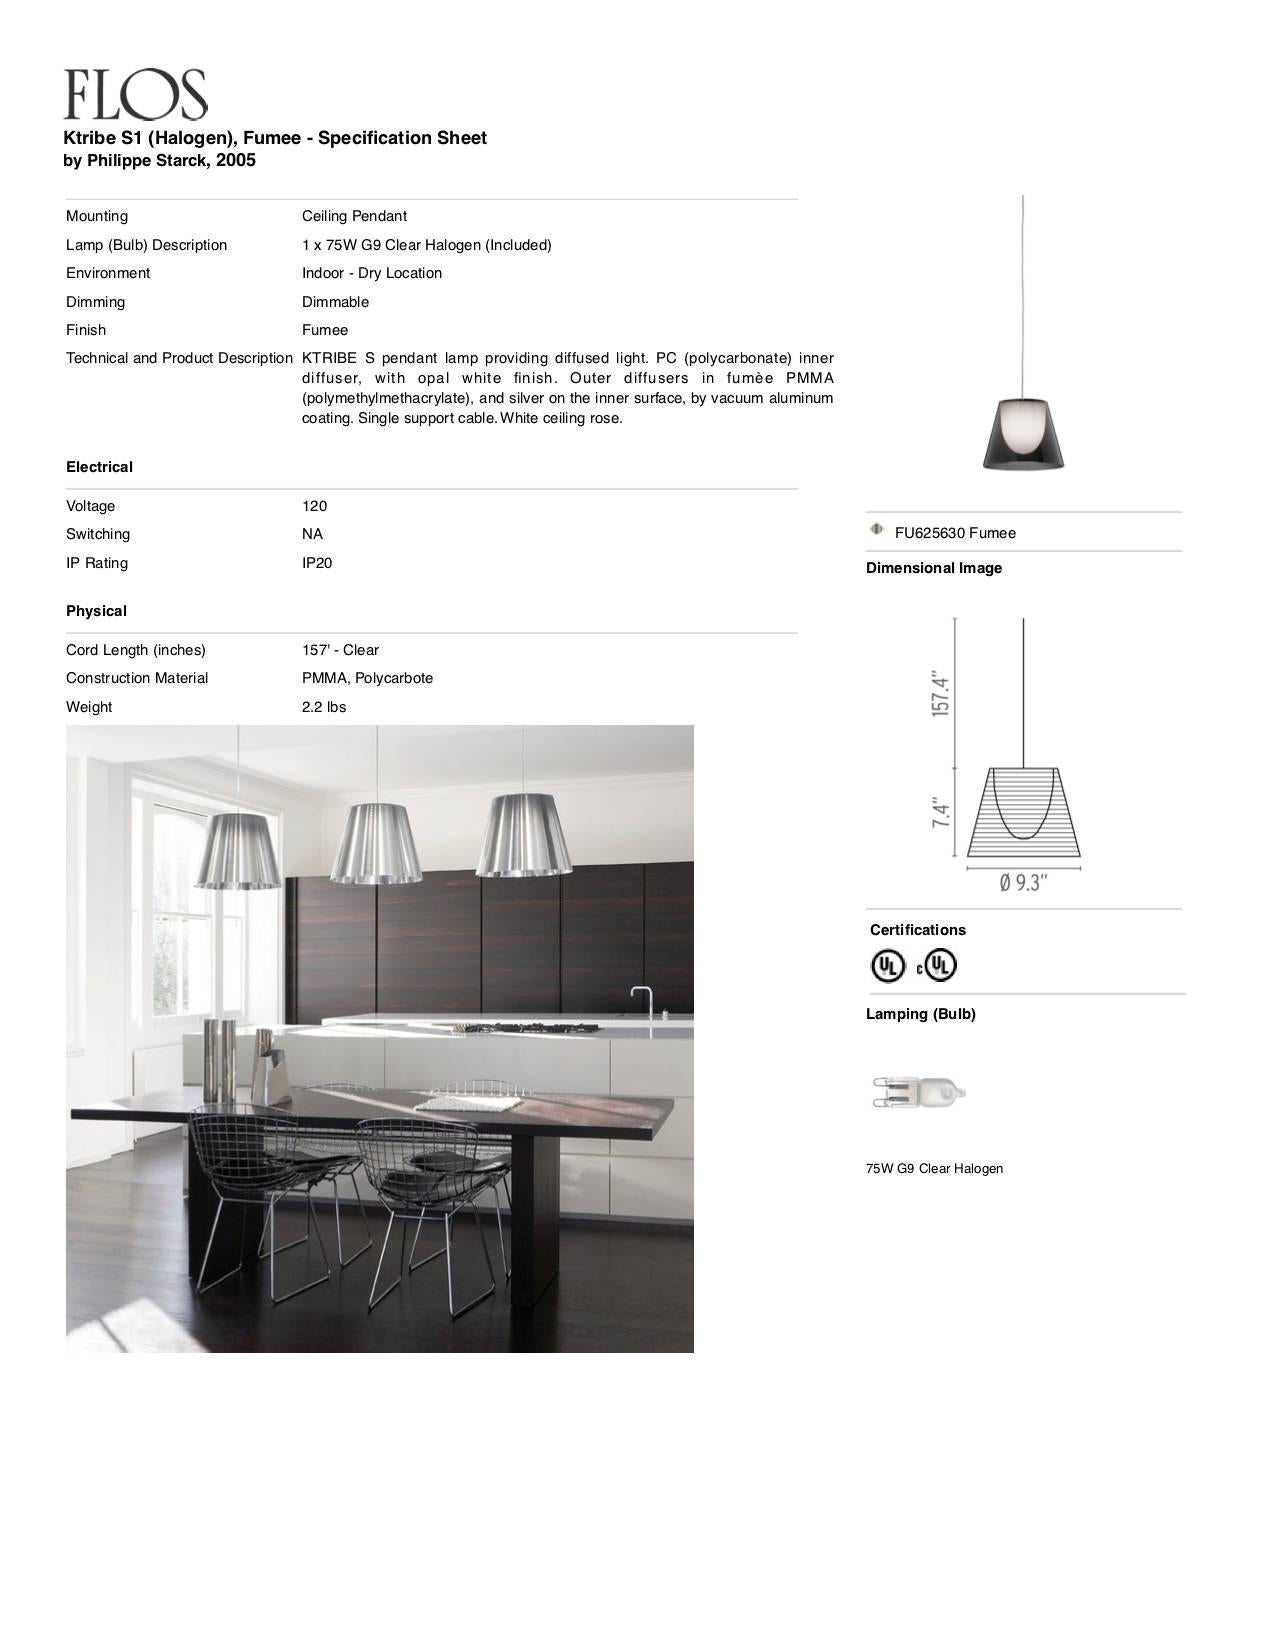 Contemporary FLOS Ktribe S1 Halogen Pendant Light in Fumee by Philippe Starck